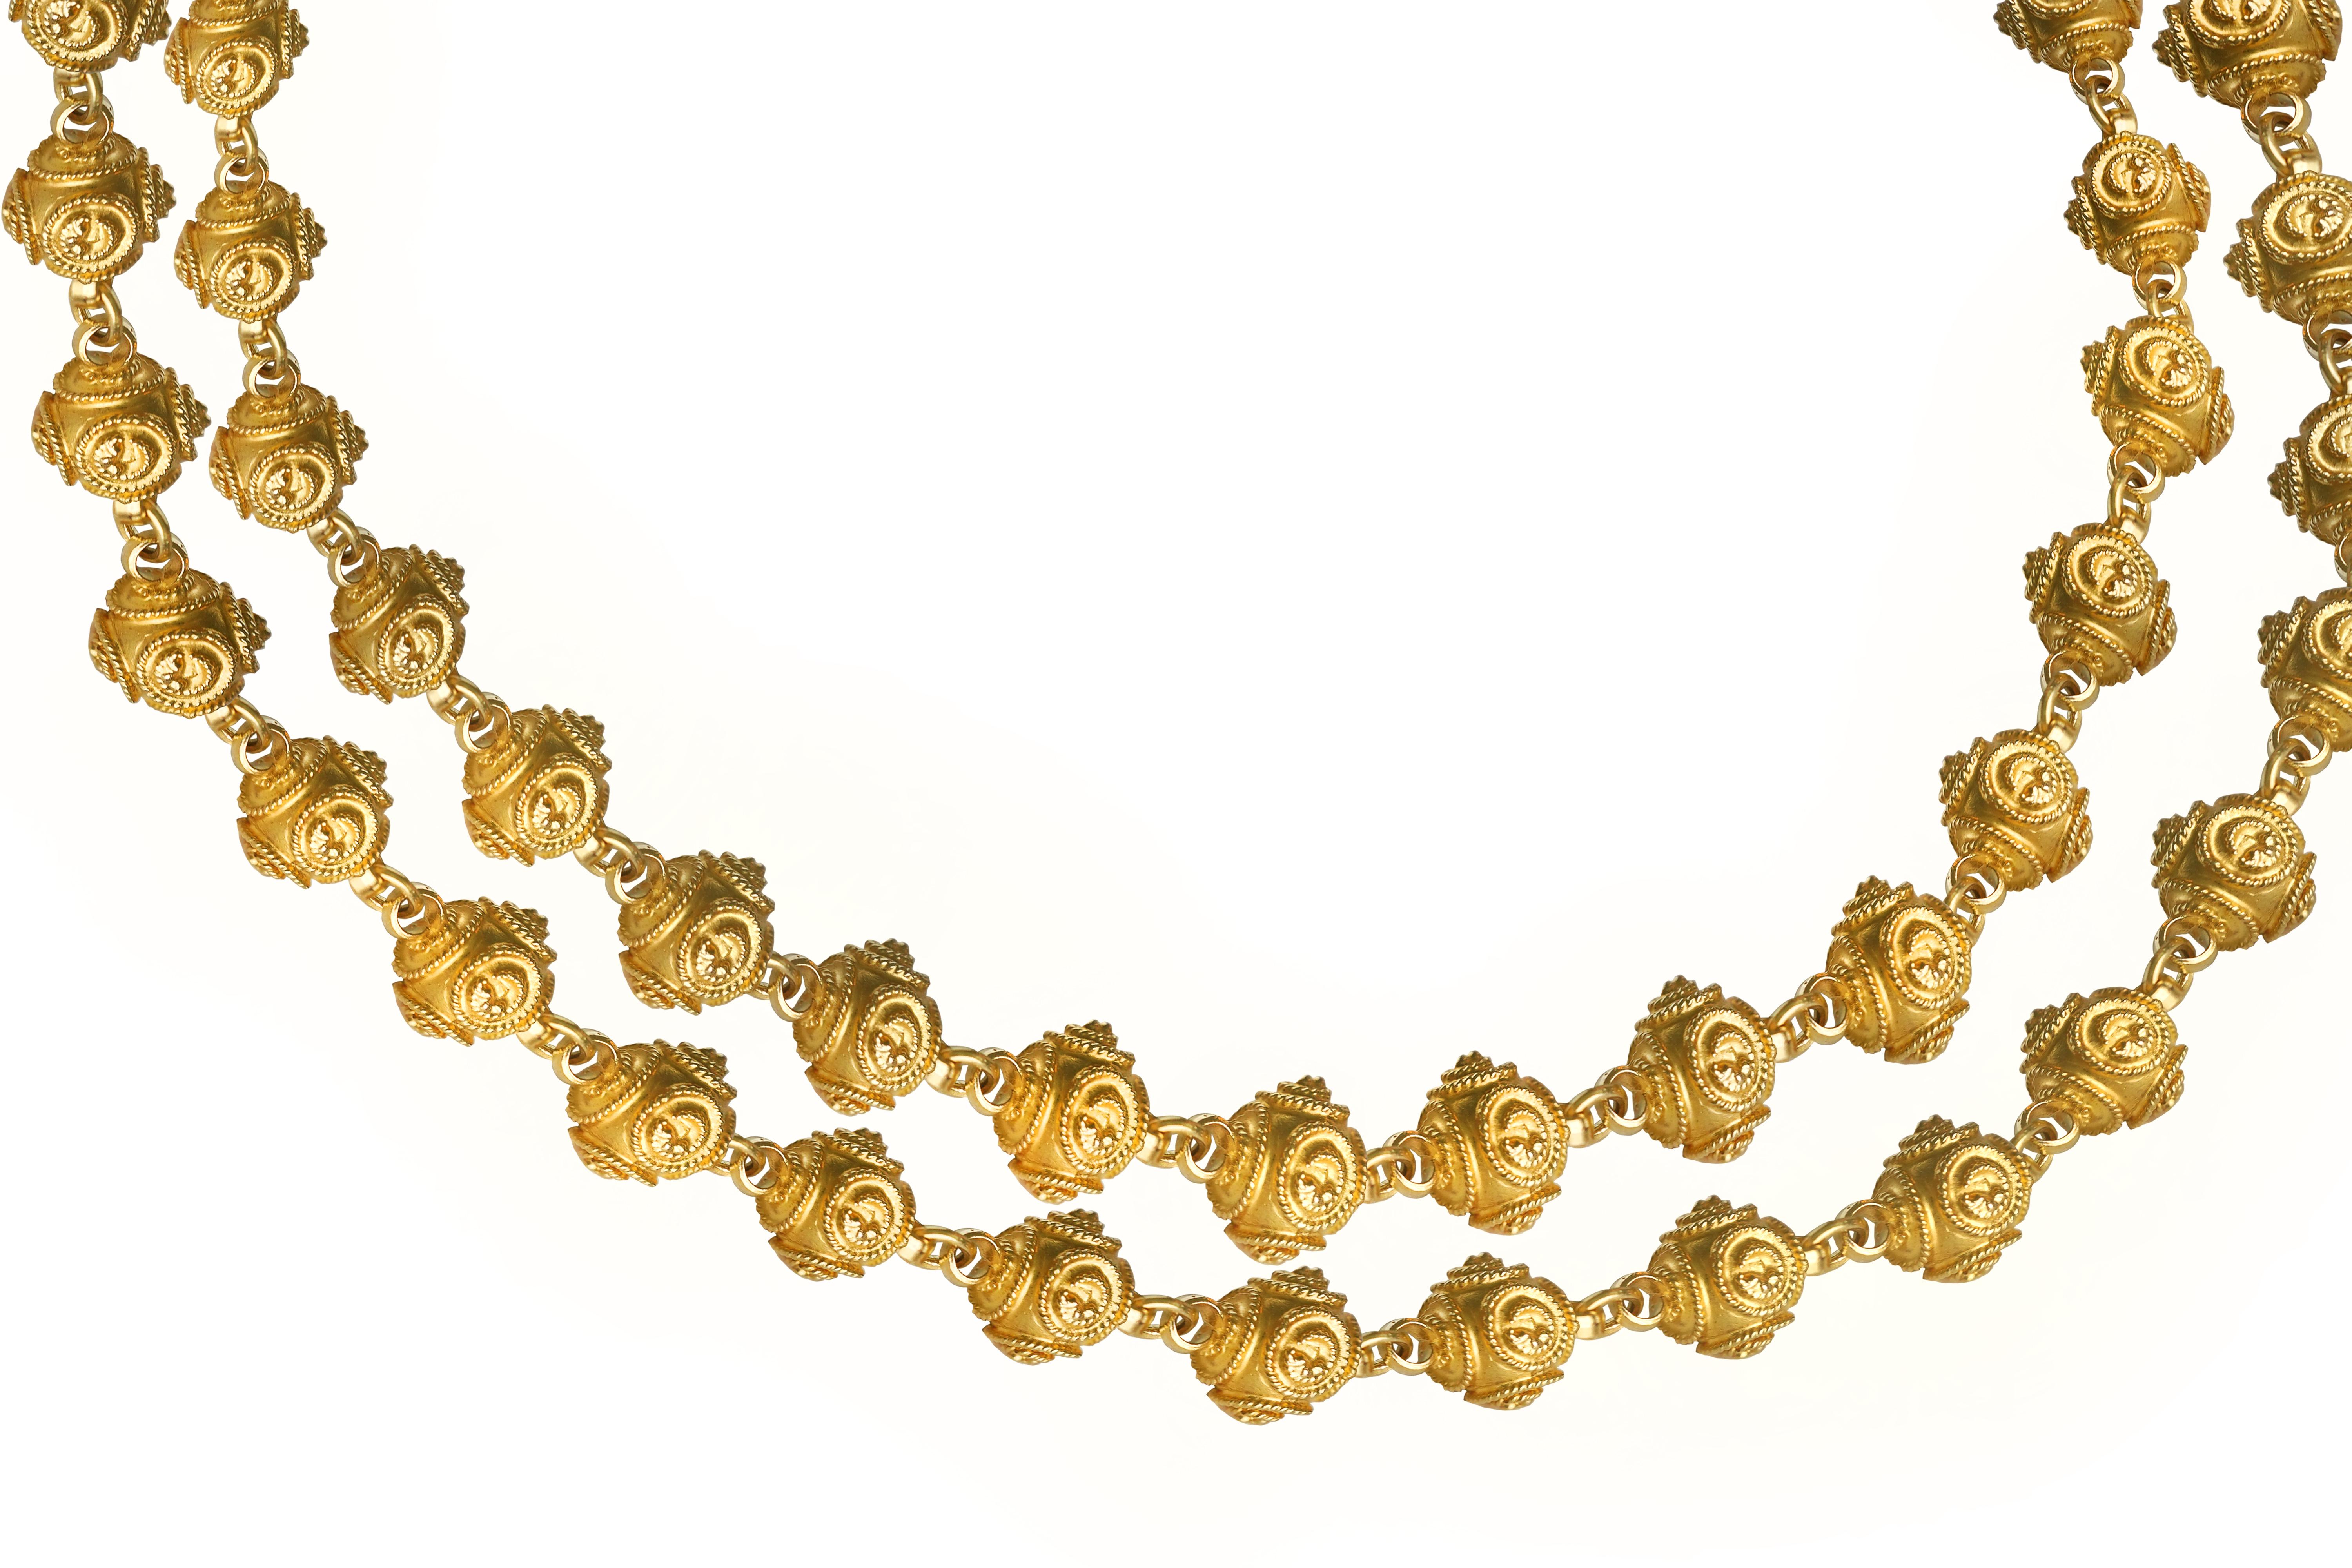 18K Yellow Gold Bead Etruscan Revival Necklace For Sale 1